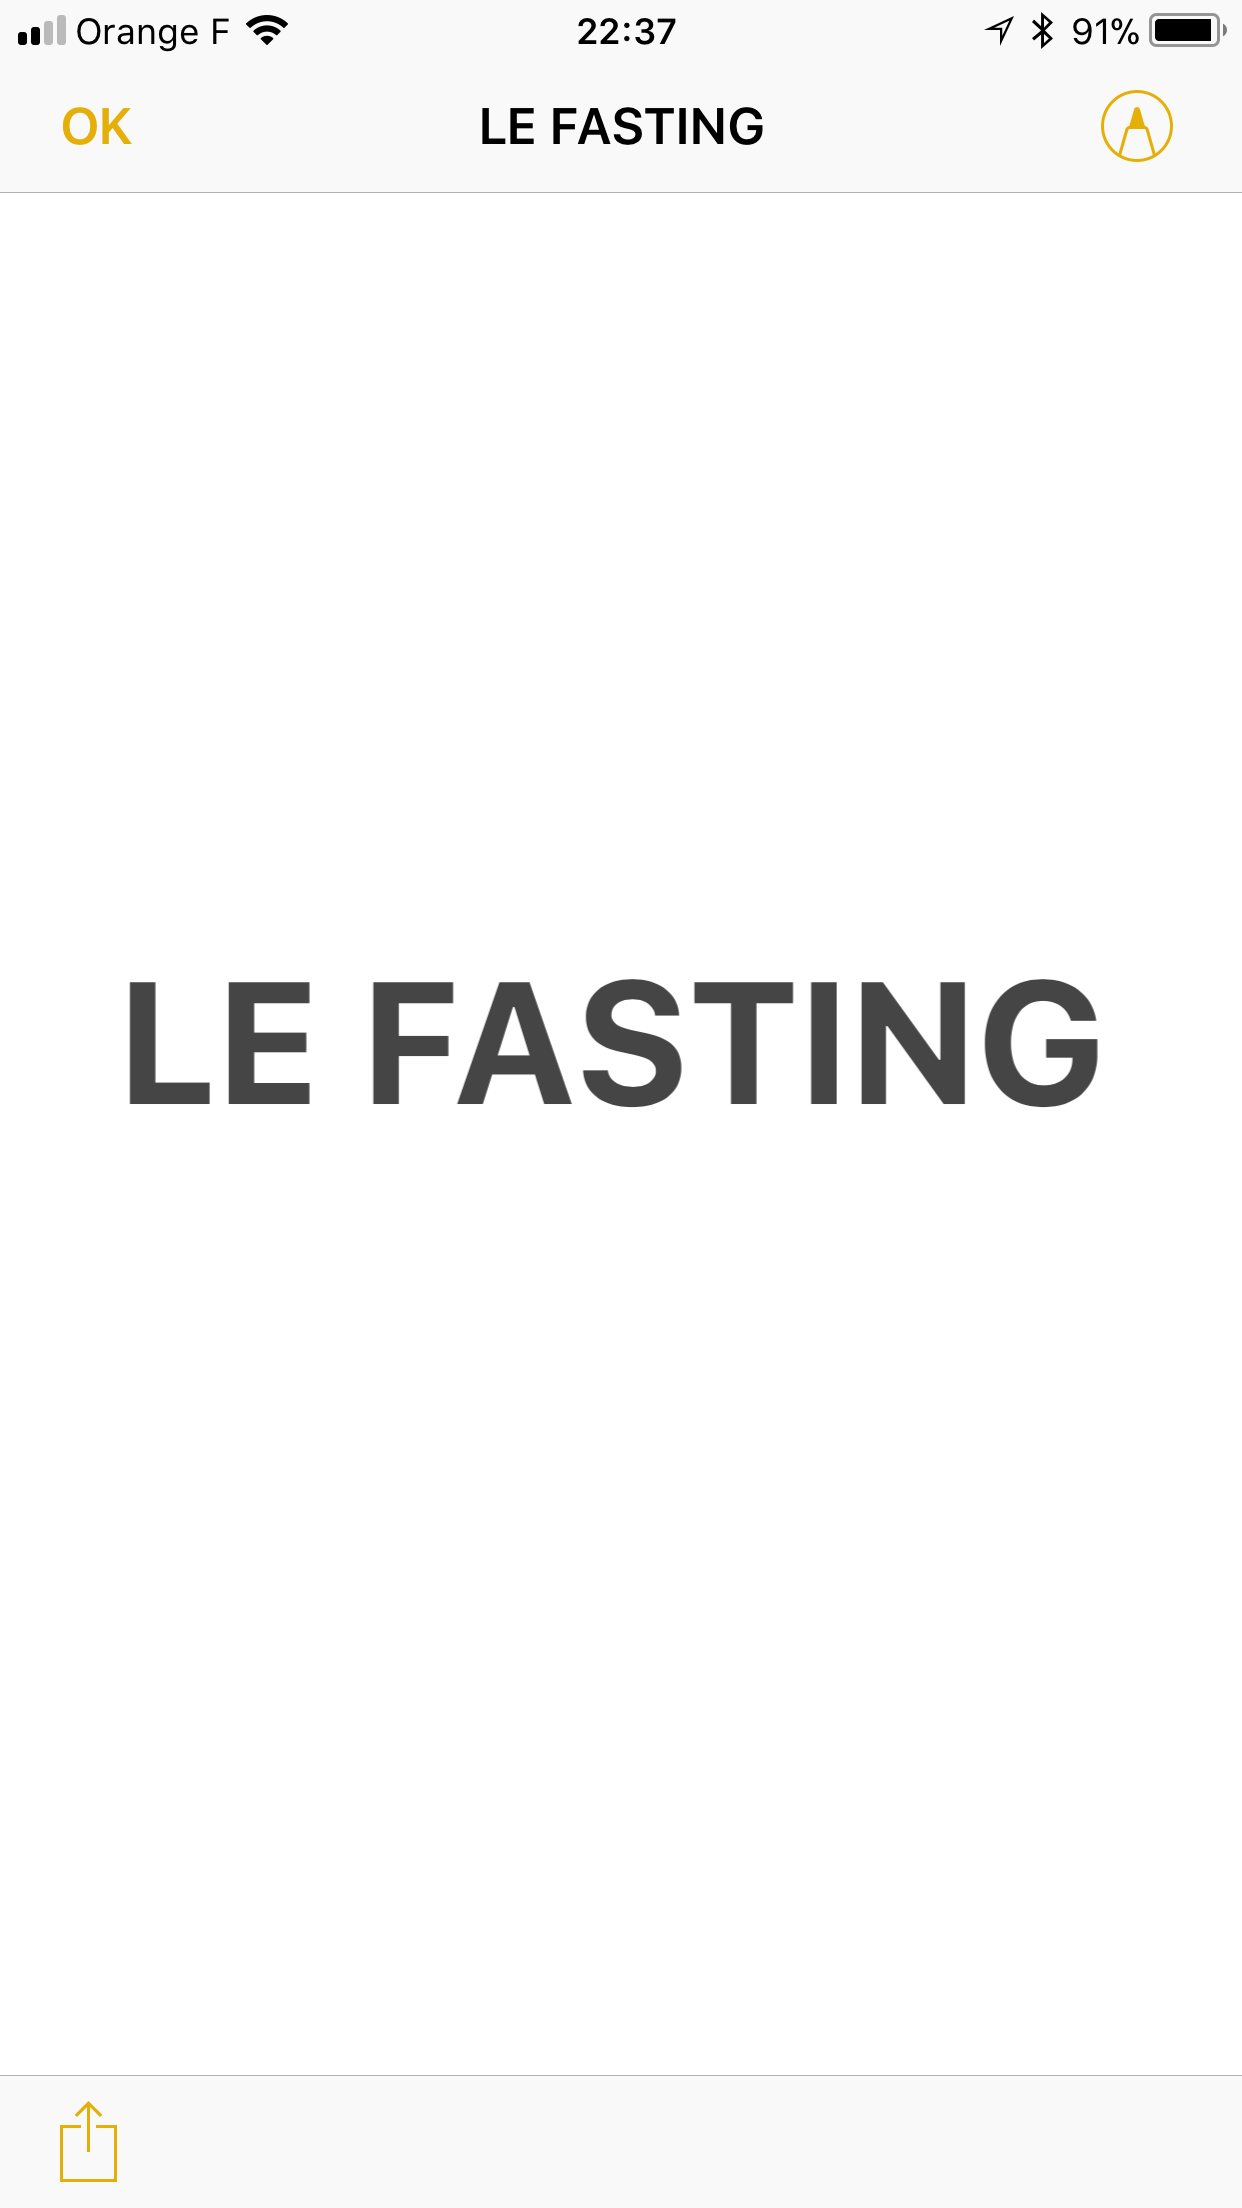 Fasting and Furious image